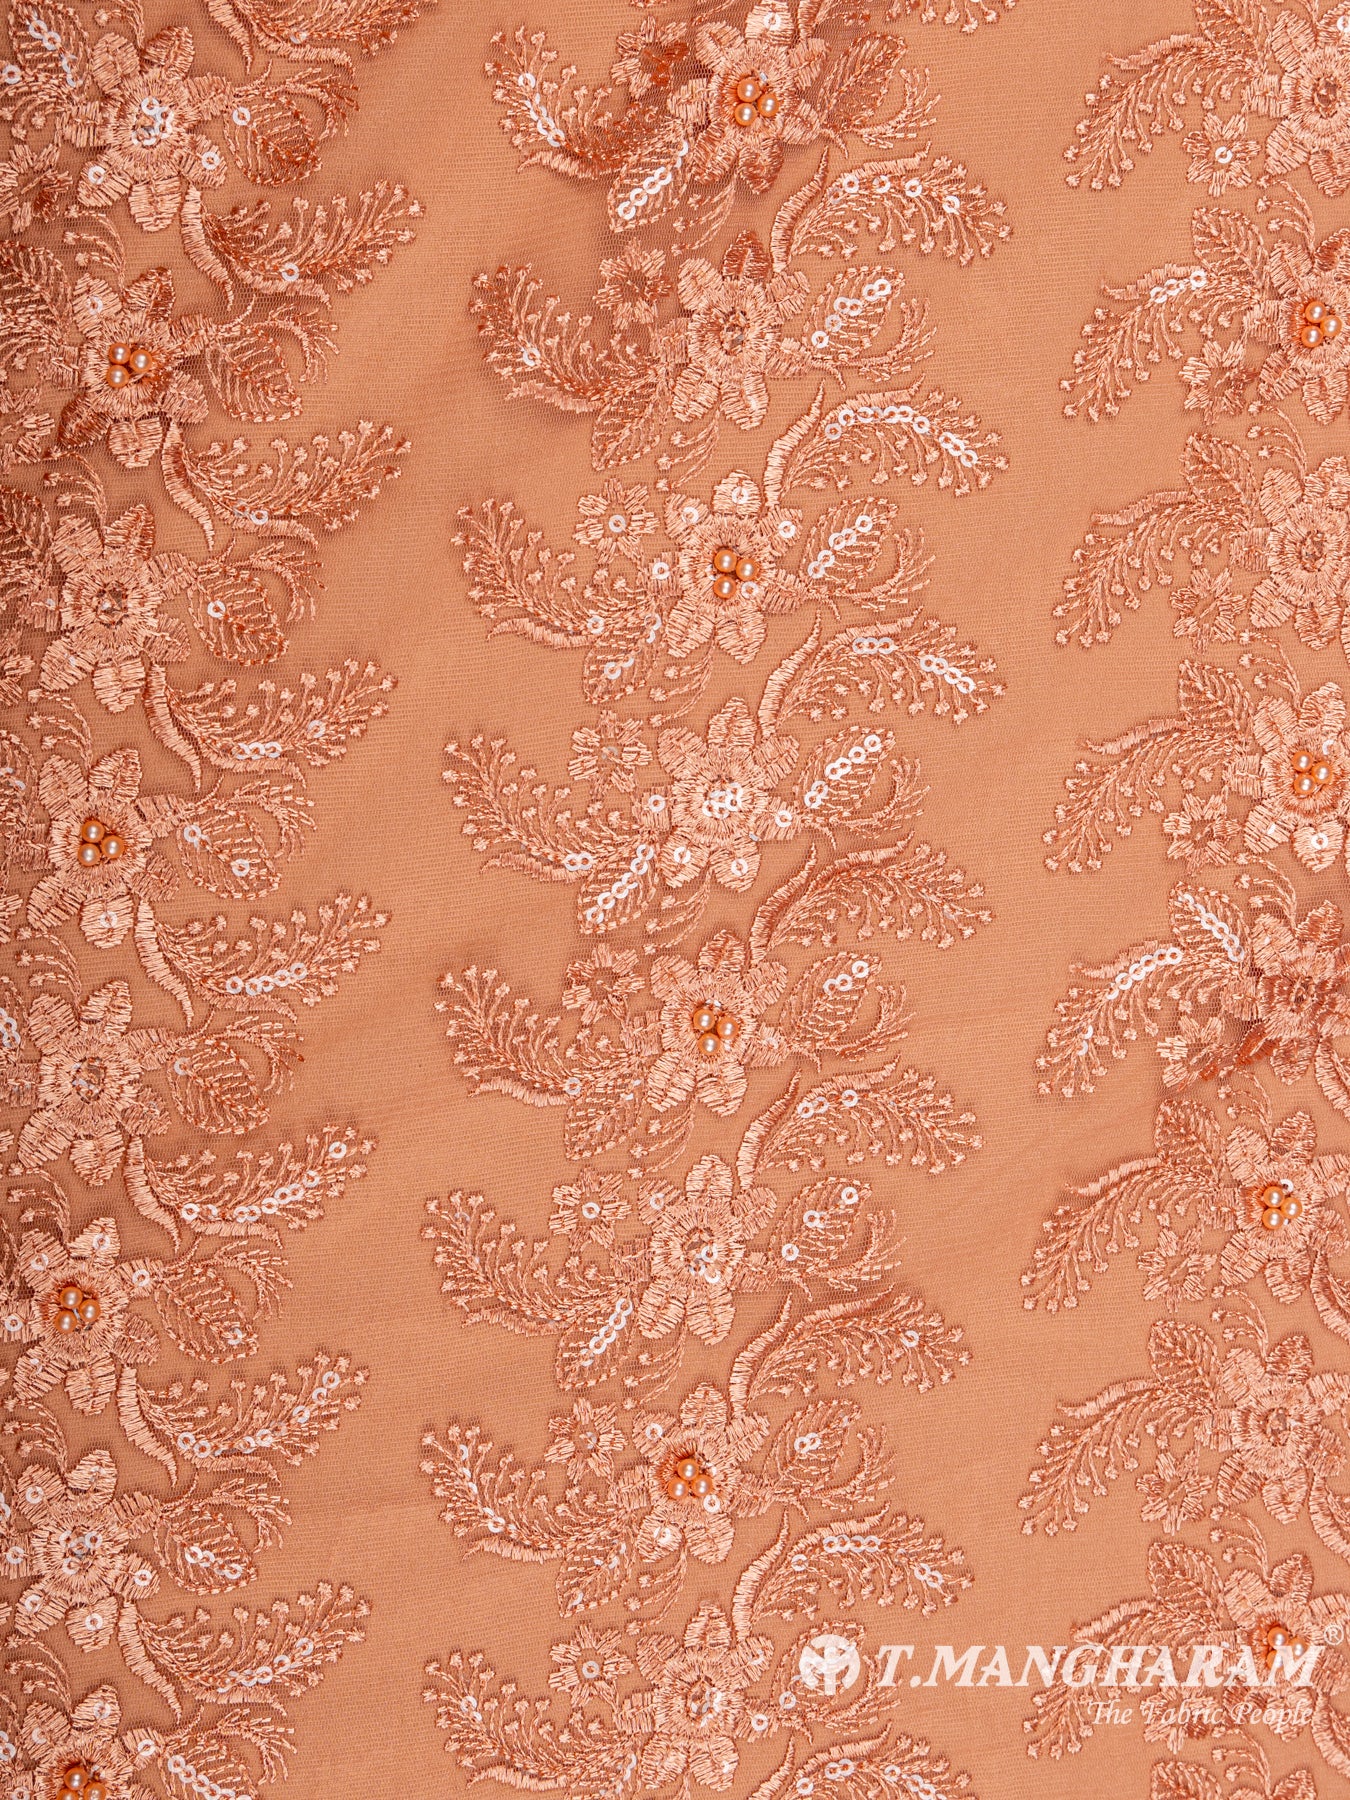 Peach Net Embroidery Fabric - EC6520 view-3